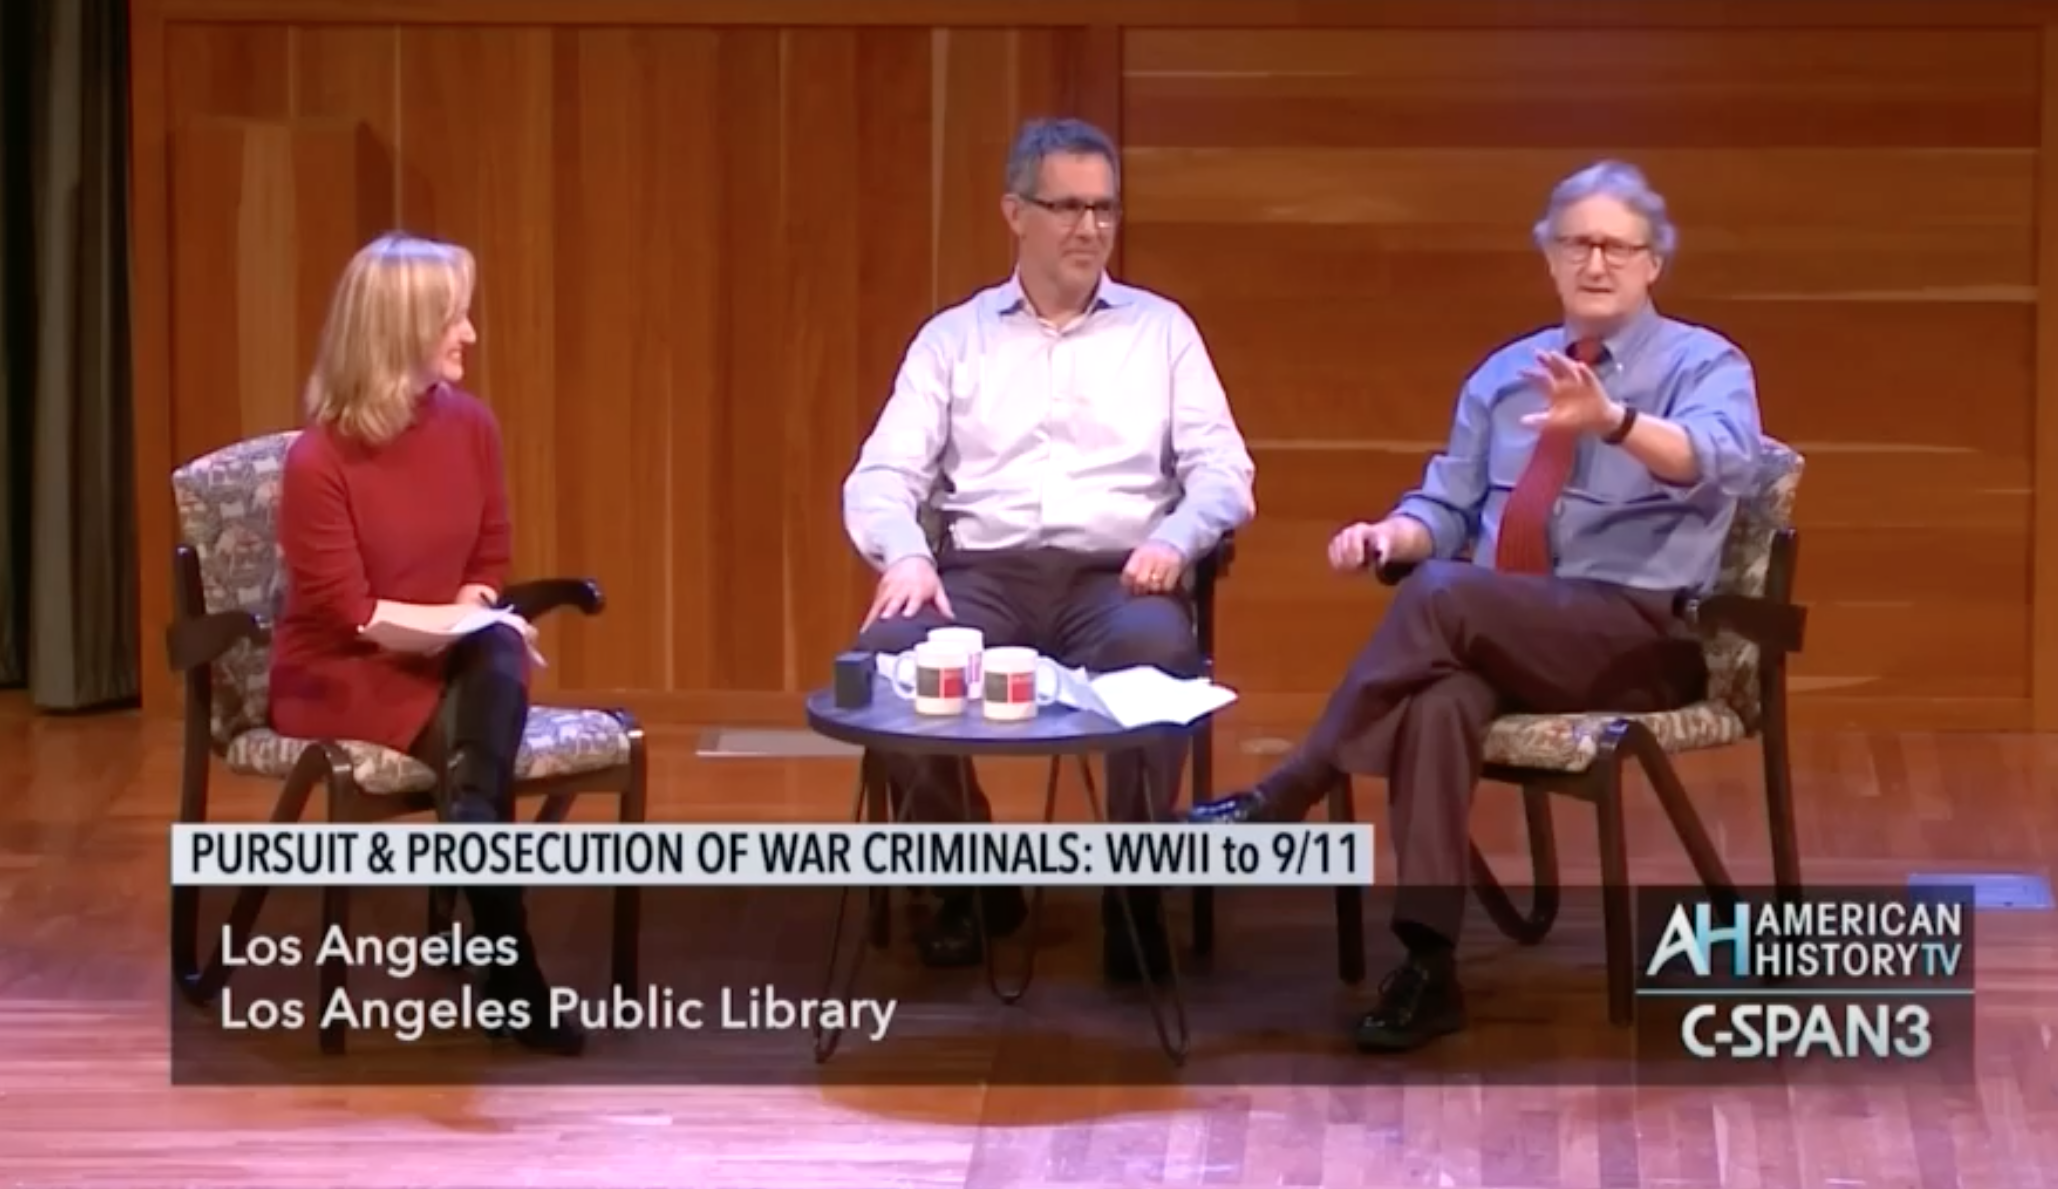 Alexa Koenig, Victor Peskin, and Eric Stover speaking at the Los Angeles Public Library.